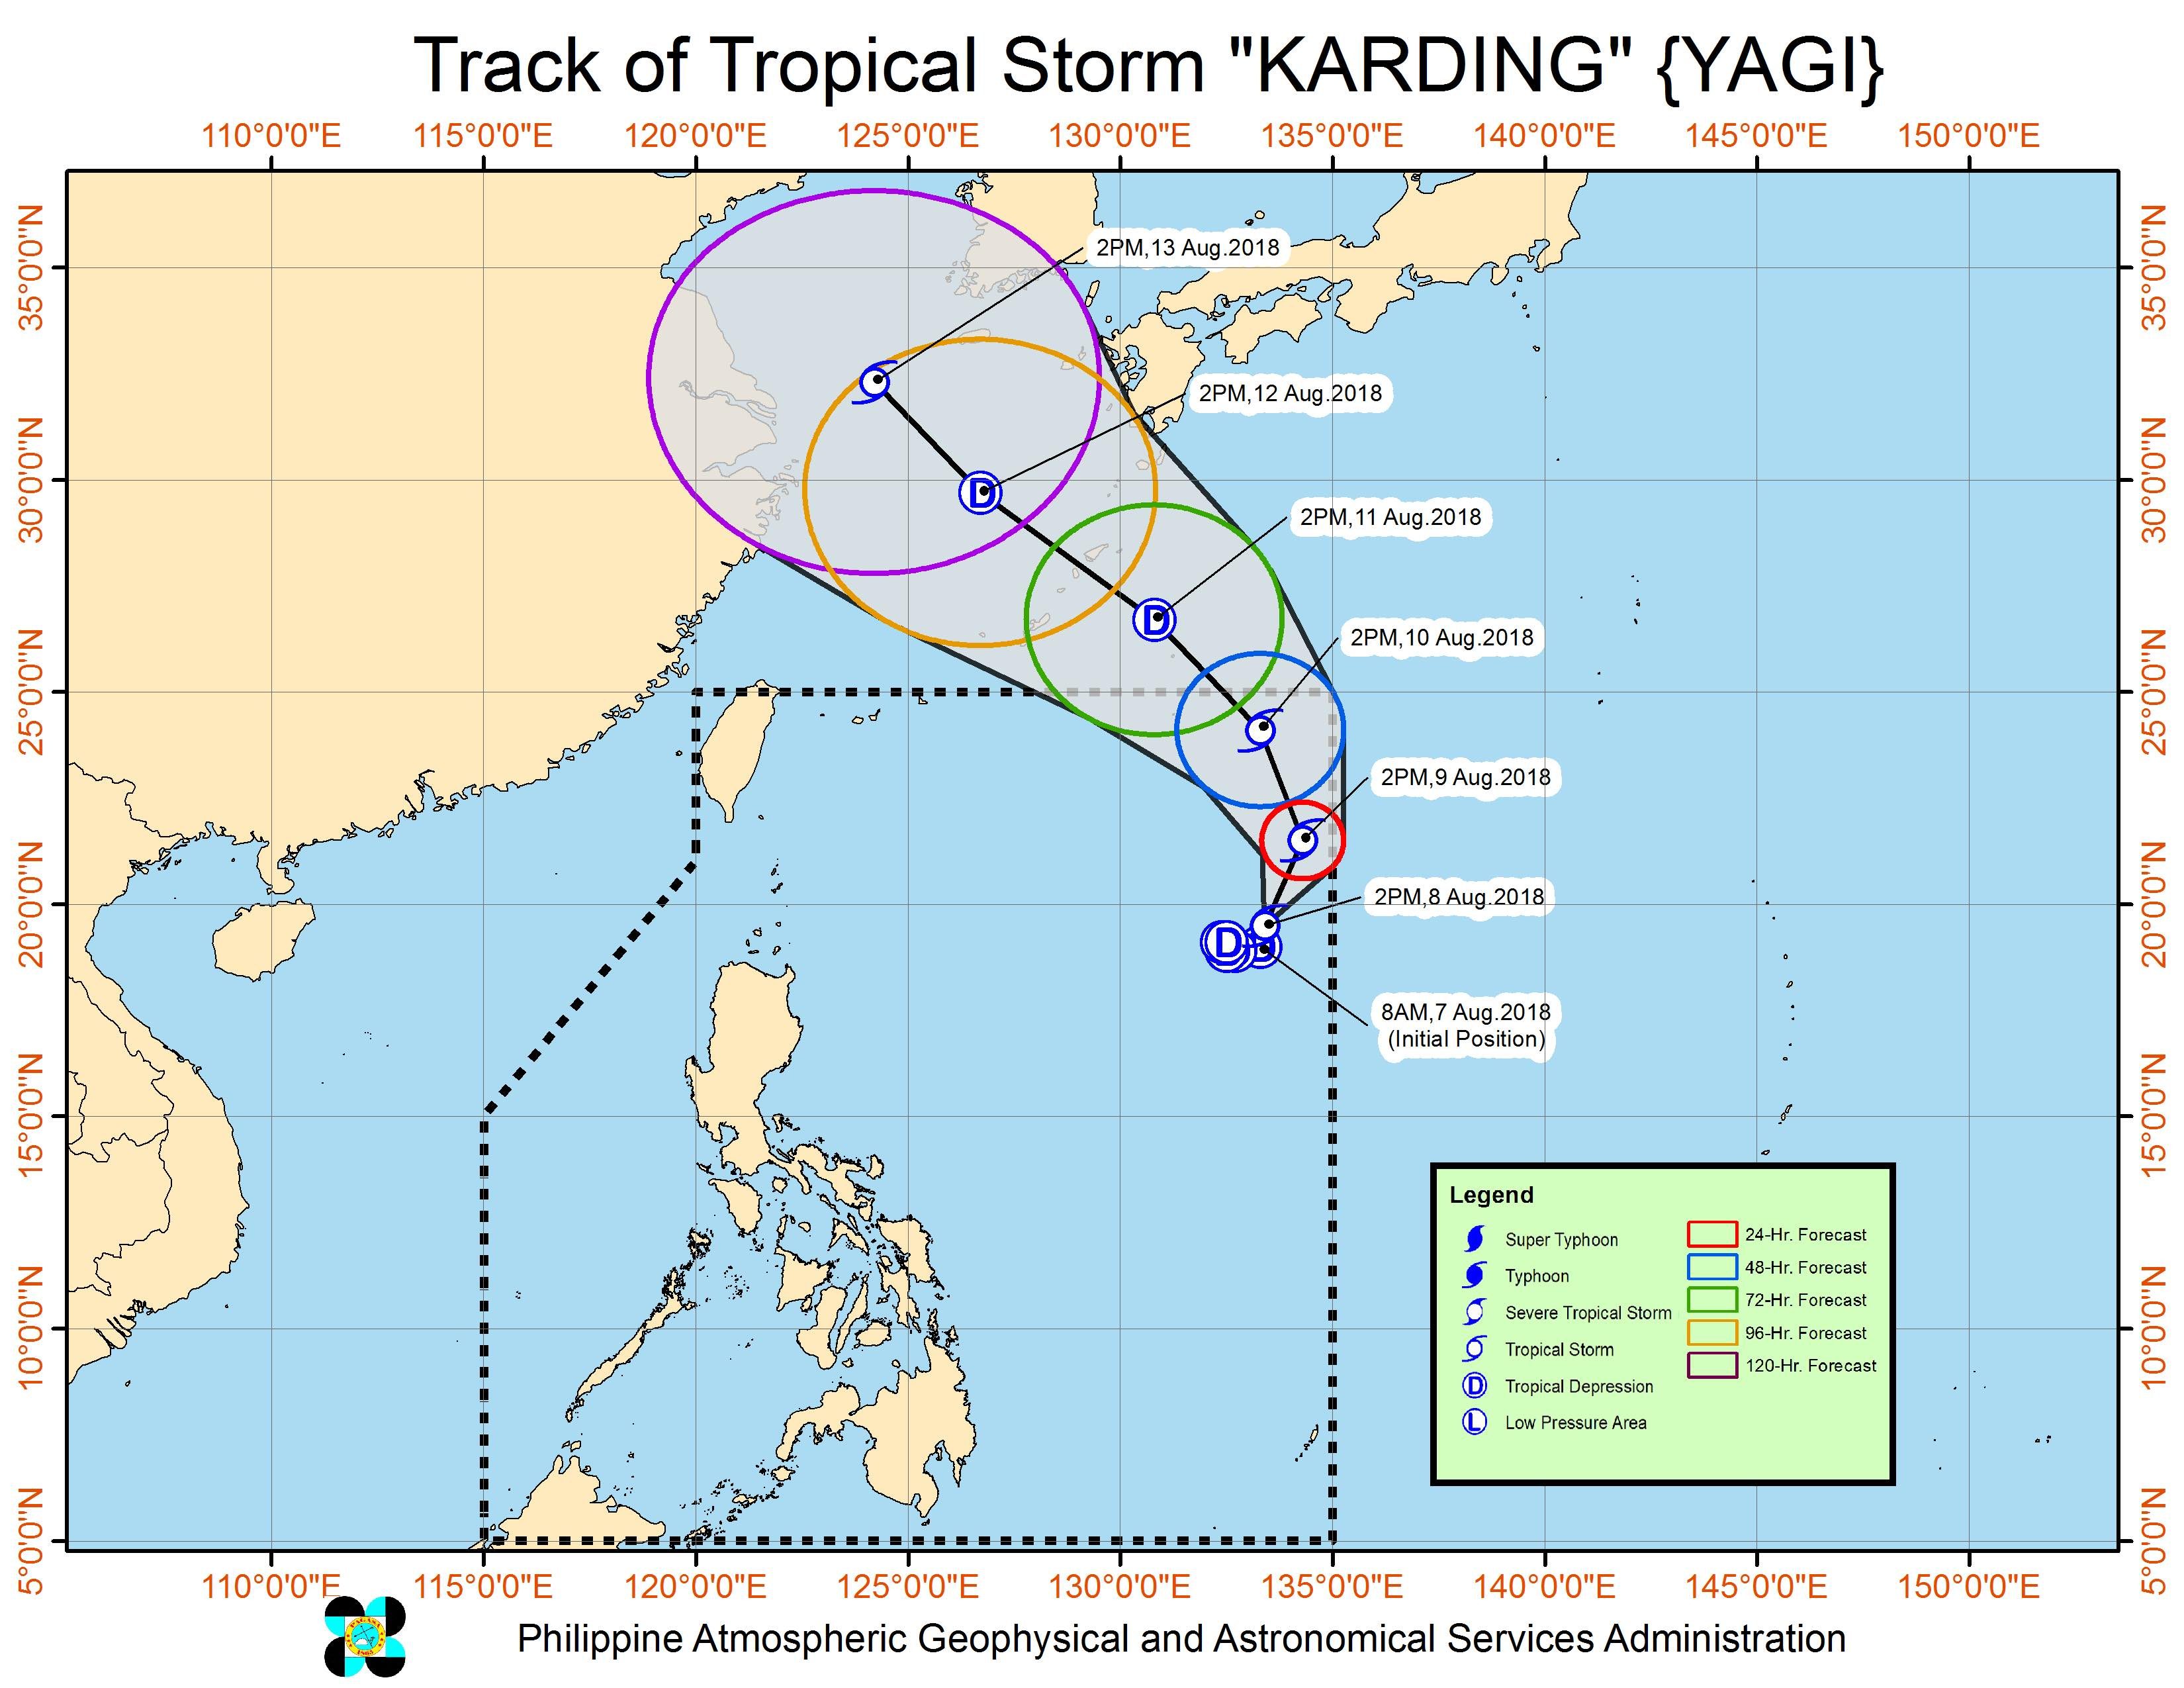 Forecast track of Tropical Storm Karding (Yagi) as of August 8, 2018, 5 pm. Image from PAGASA 